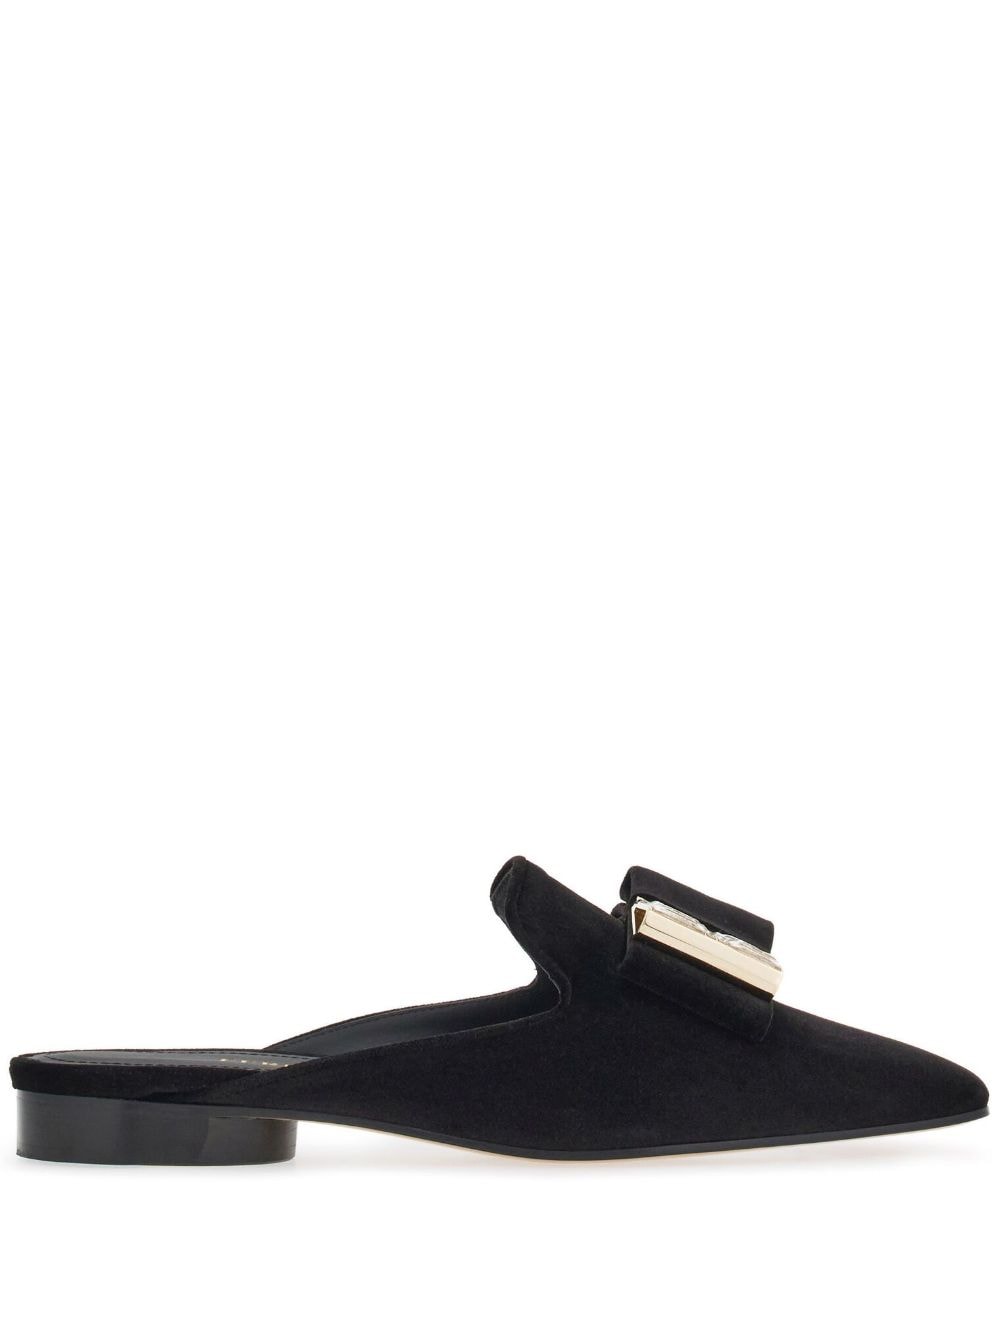 Ferragamo bow-detailing leather loafers - Black